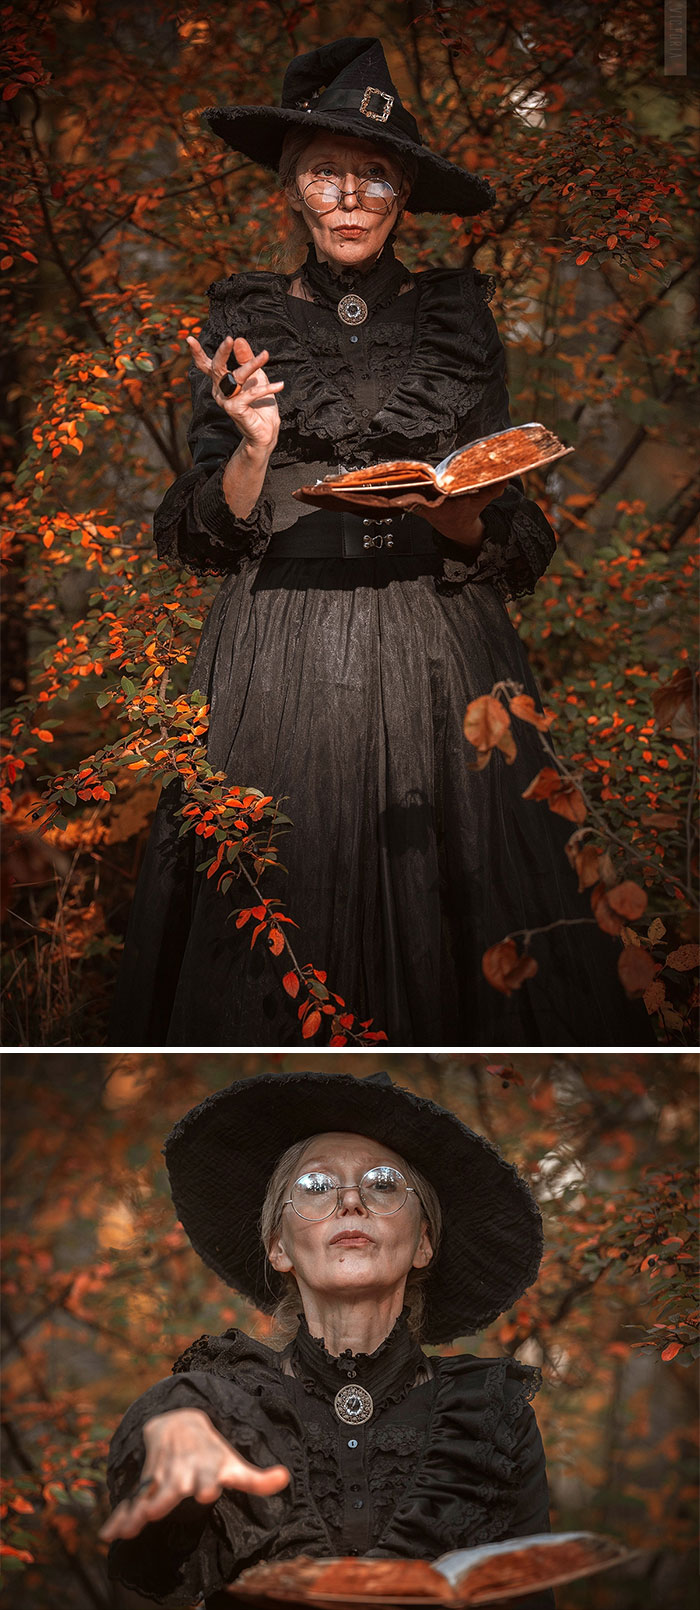 Russian Grandma Makes Amazing Cosplays With Materials Found In Flea Markets And Second Hand Stores